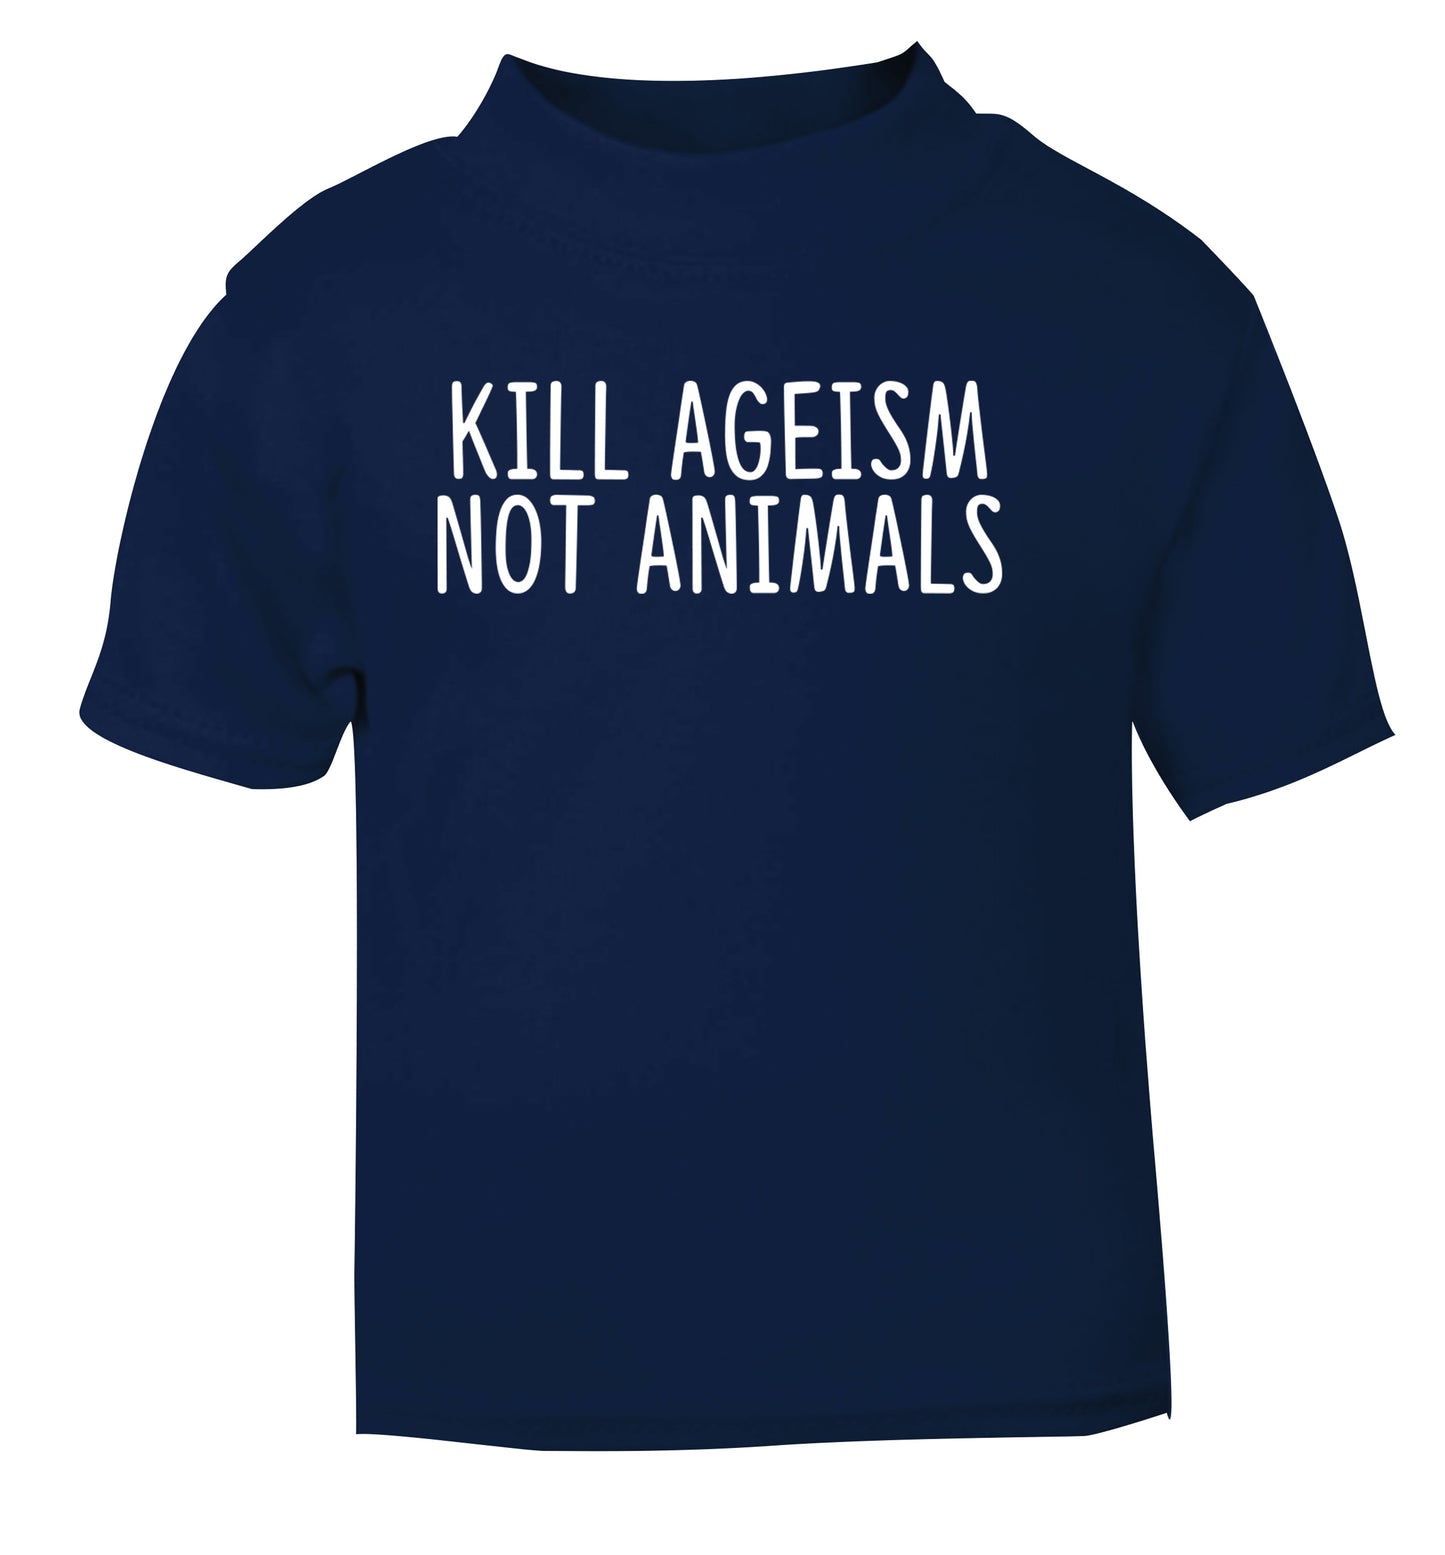 Kill Ageism Not Animals navy Baby Toddler Tshirt 2 Years